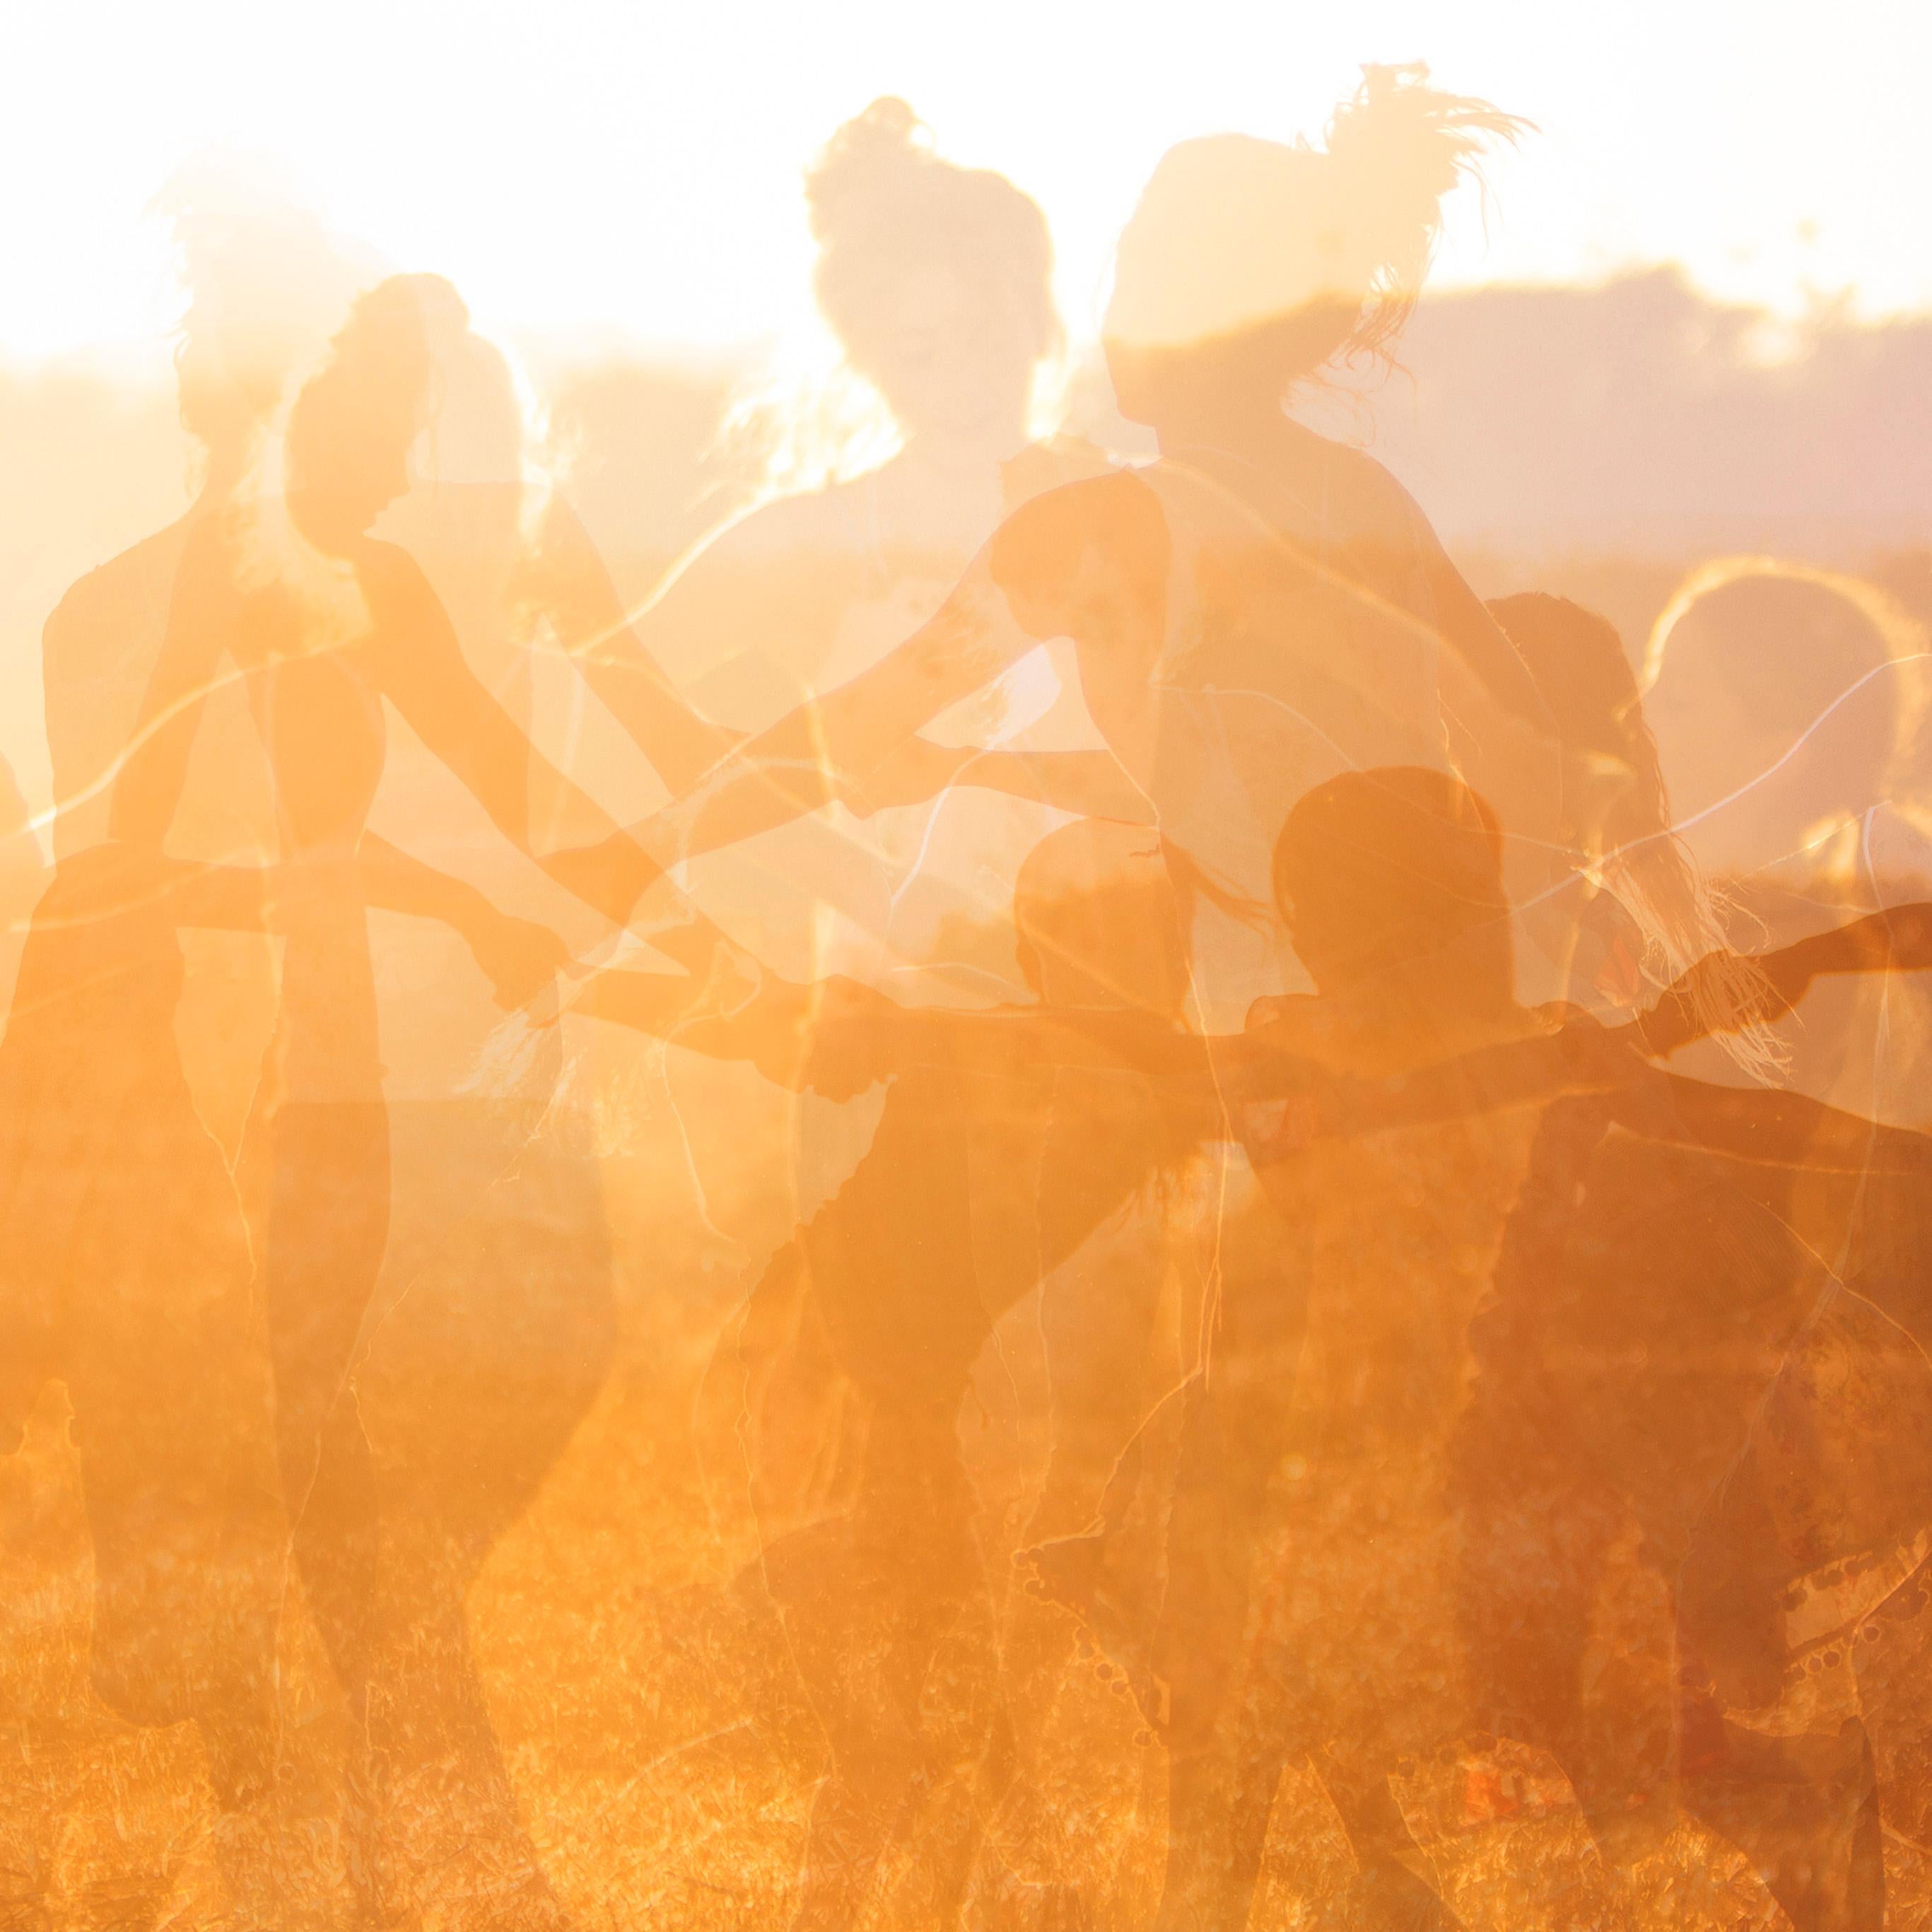 'Harvest Dance' 
Limited edition archival photograph. Unframed, hand signed and numbered
_________________
Late August, captured in the glow of the evening sun, my daughters join hands and dance spontaneously after the harvest, their spirits high